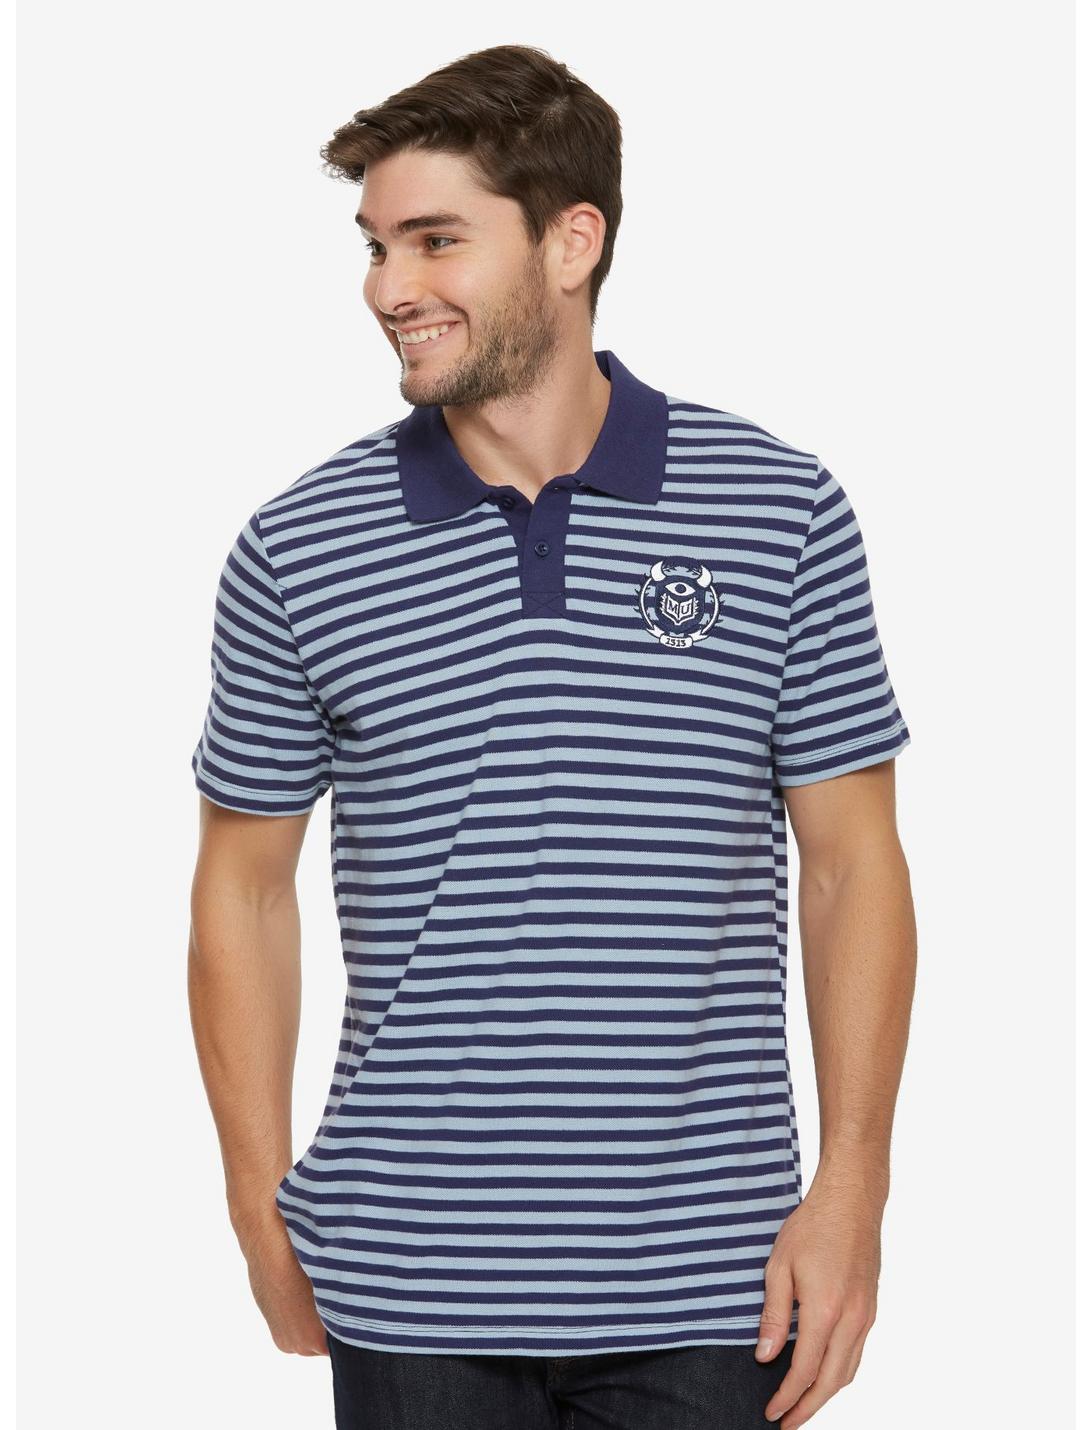 Disney Pixar Monsters University Striped Polo Shirt - BoxLunch Exclusive, GREY, hi-res